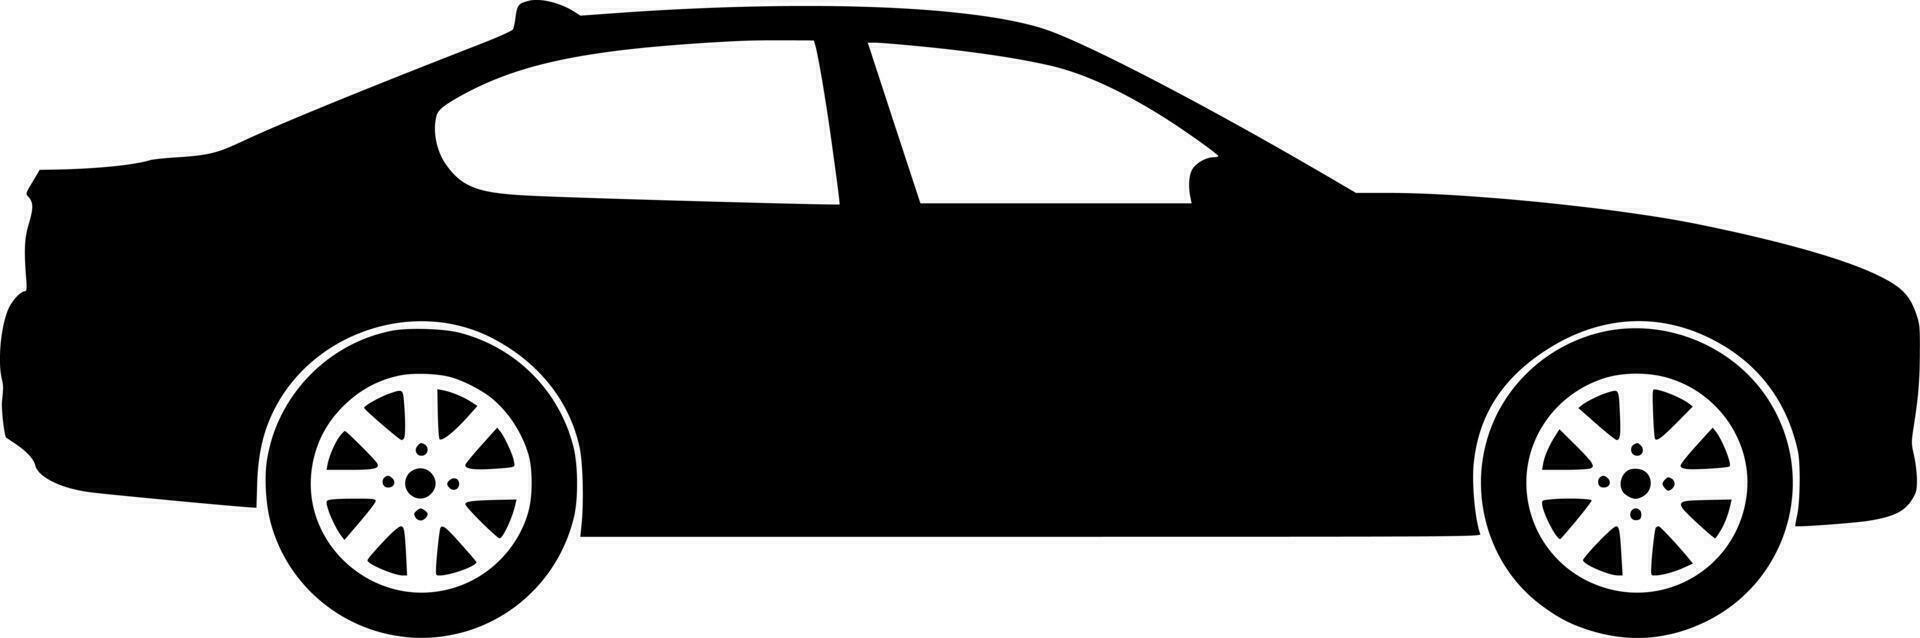 Vector silhouette of car on white background